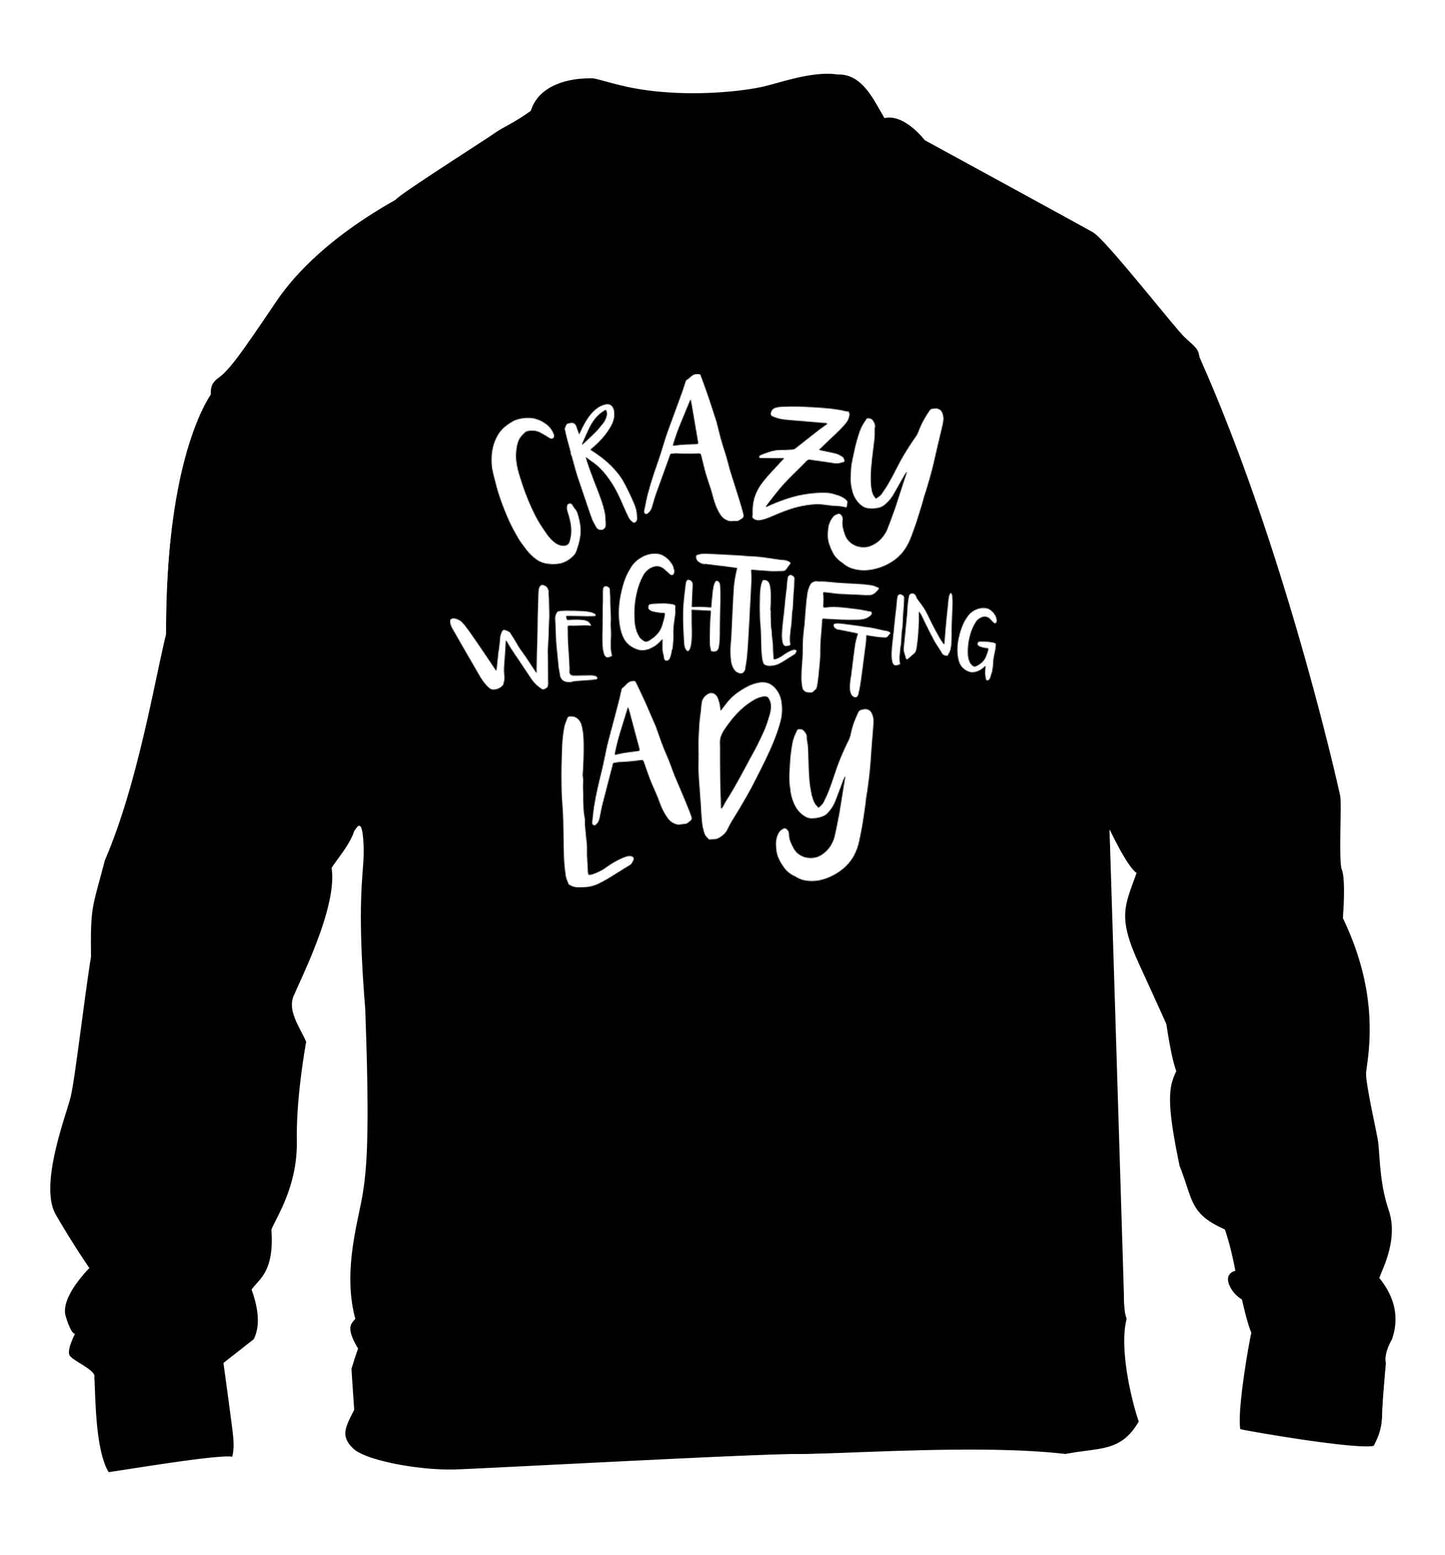 Crazy weightlifting lady children's black sweater 12-13 Years